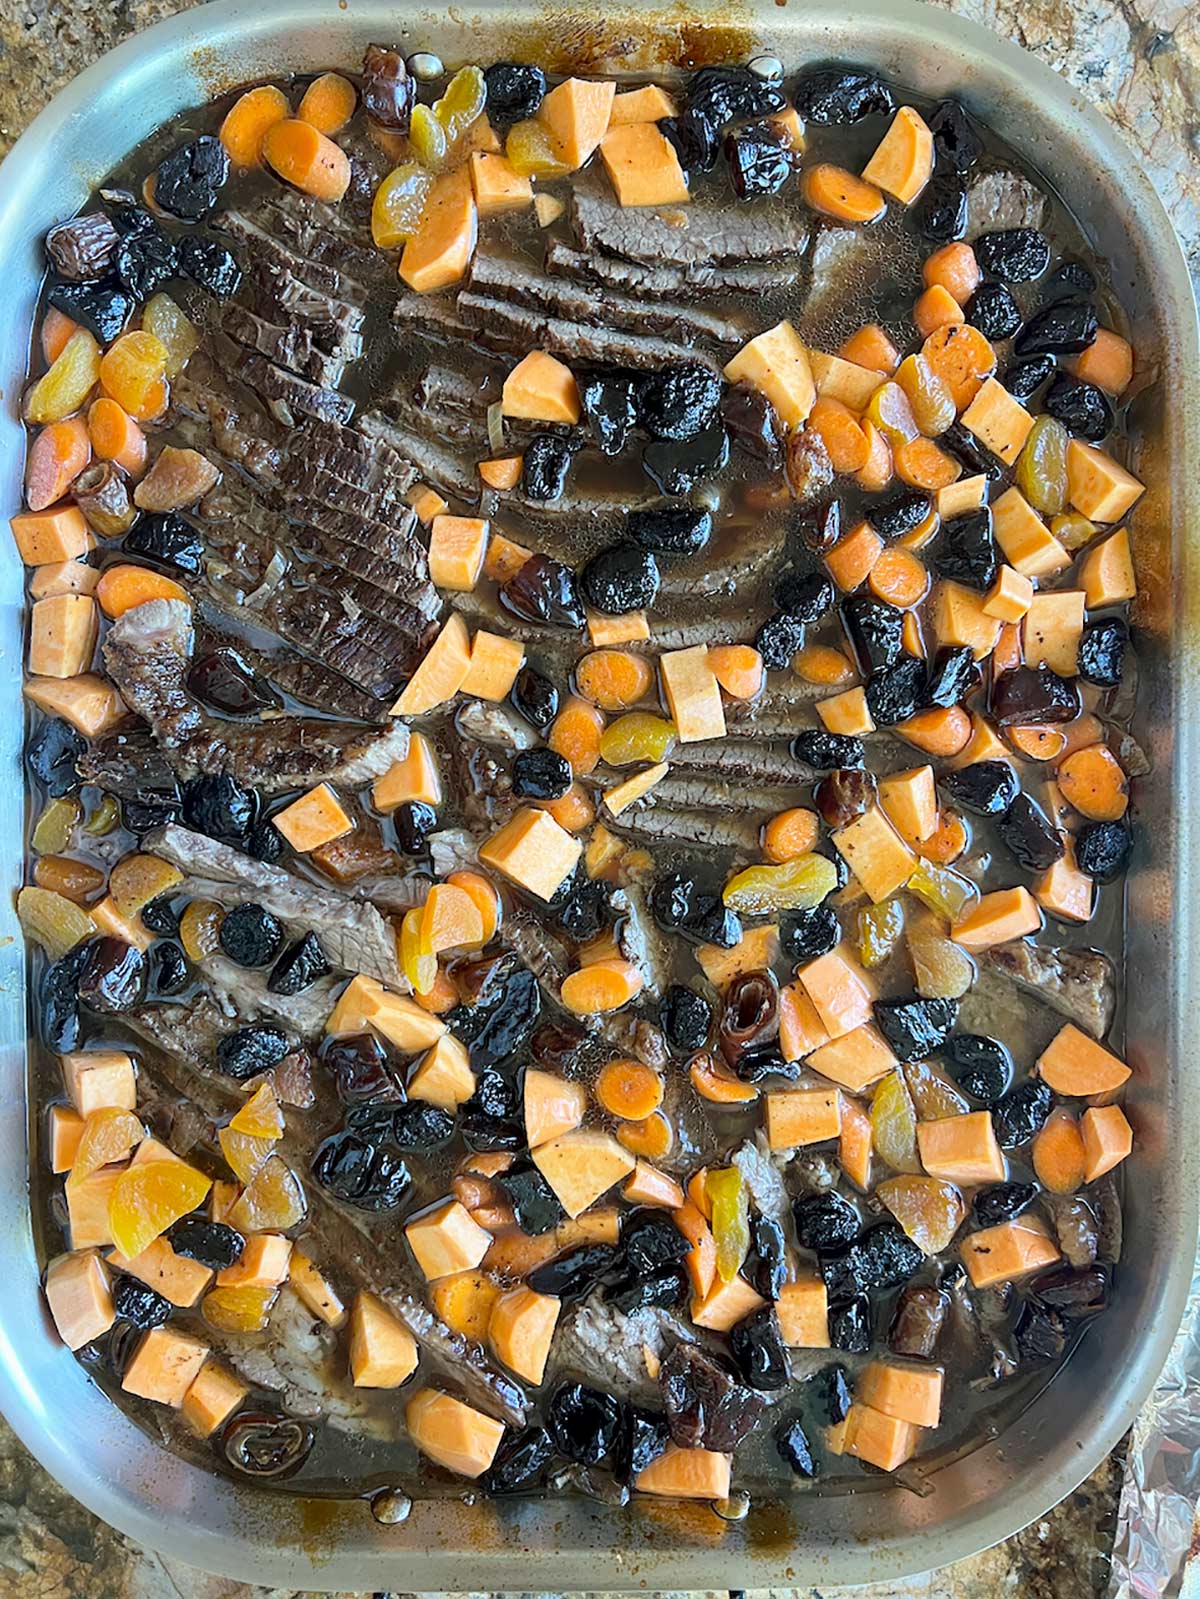 Vegetables and dried fruit added to braised beef brisket and ready to go back in the oven.